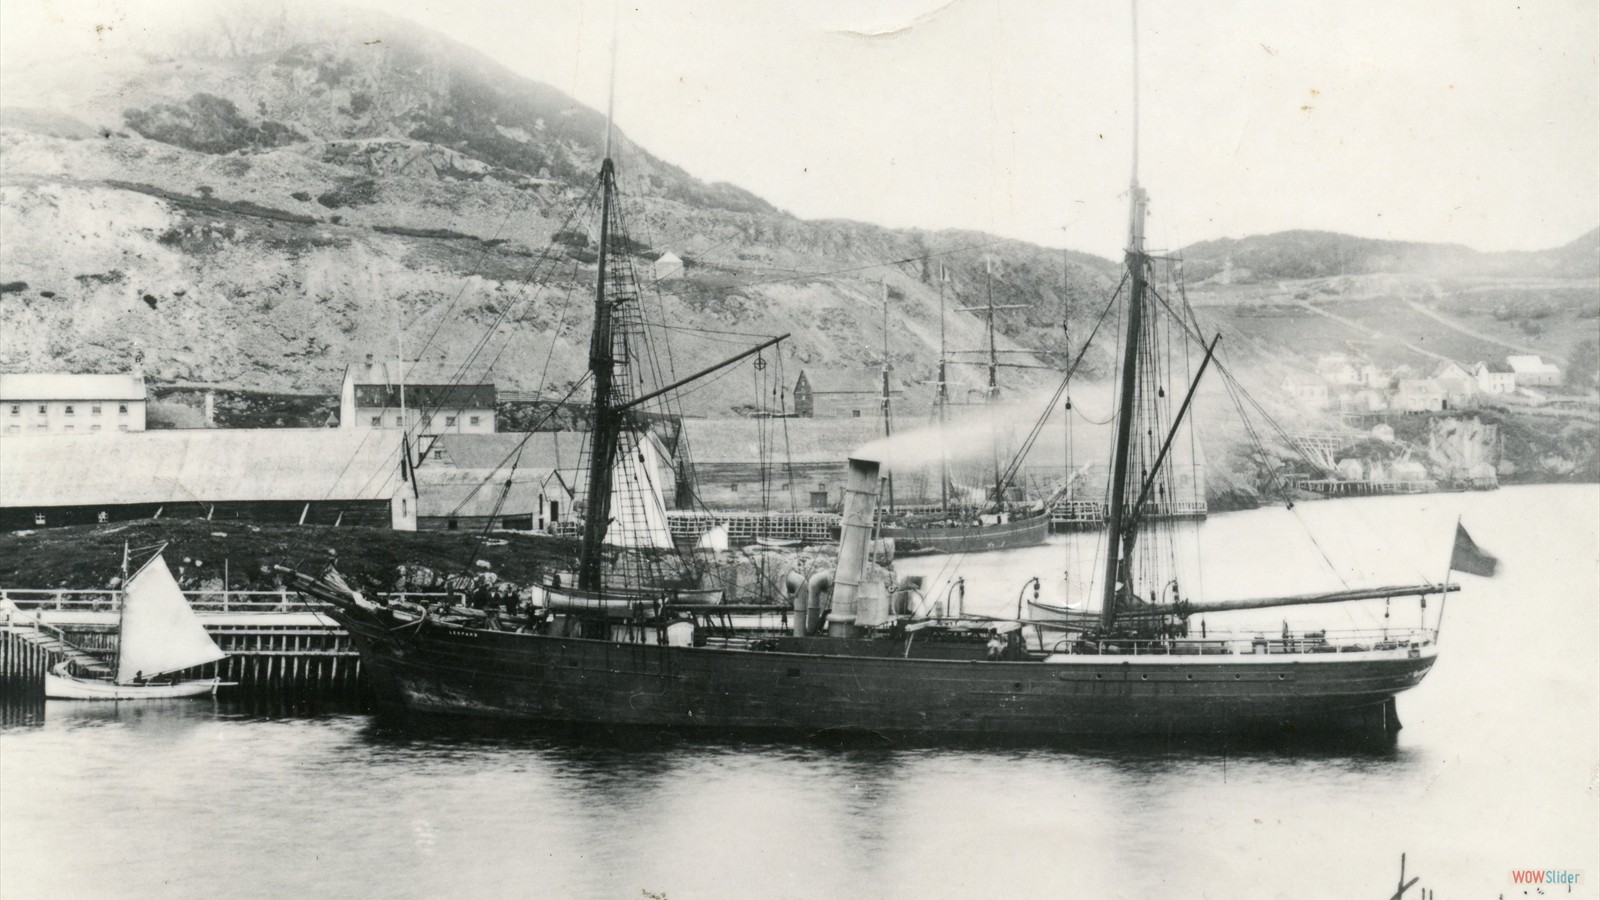 S.S. Leopard at the Government Wharf - the east coast mail and passenger service vessel; the Trinity West ferry to the left of the photo, Lester-Garland Premises in the background